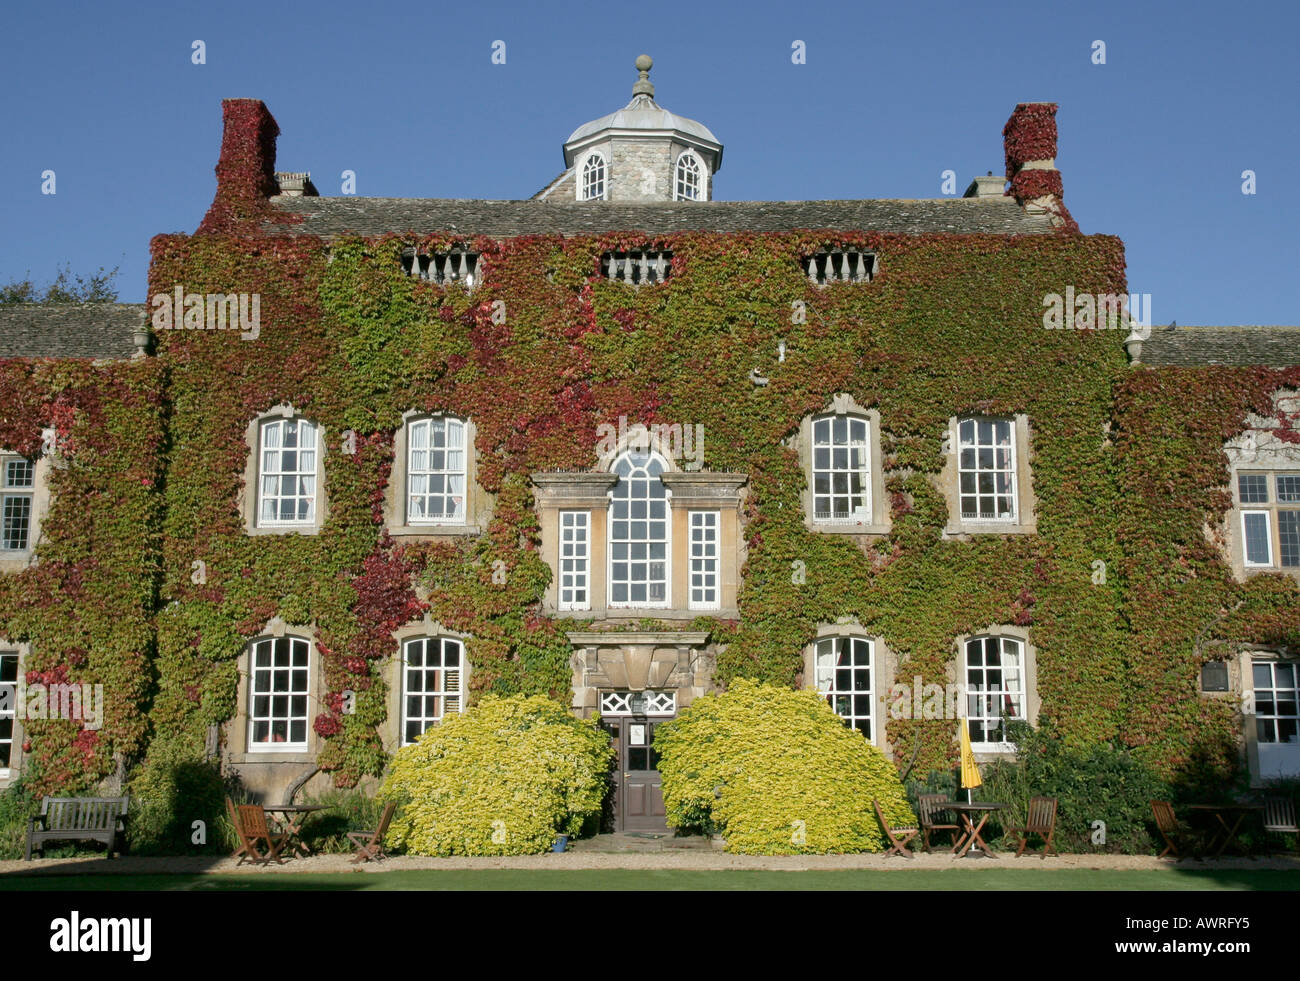 Virginia Creeper covering wall of Harrington House, Bourton-on-the-Water,  Cotswolds, UK Stock Photo - Alamy